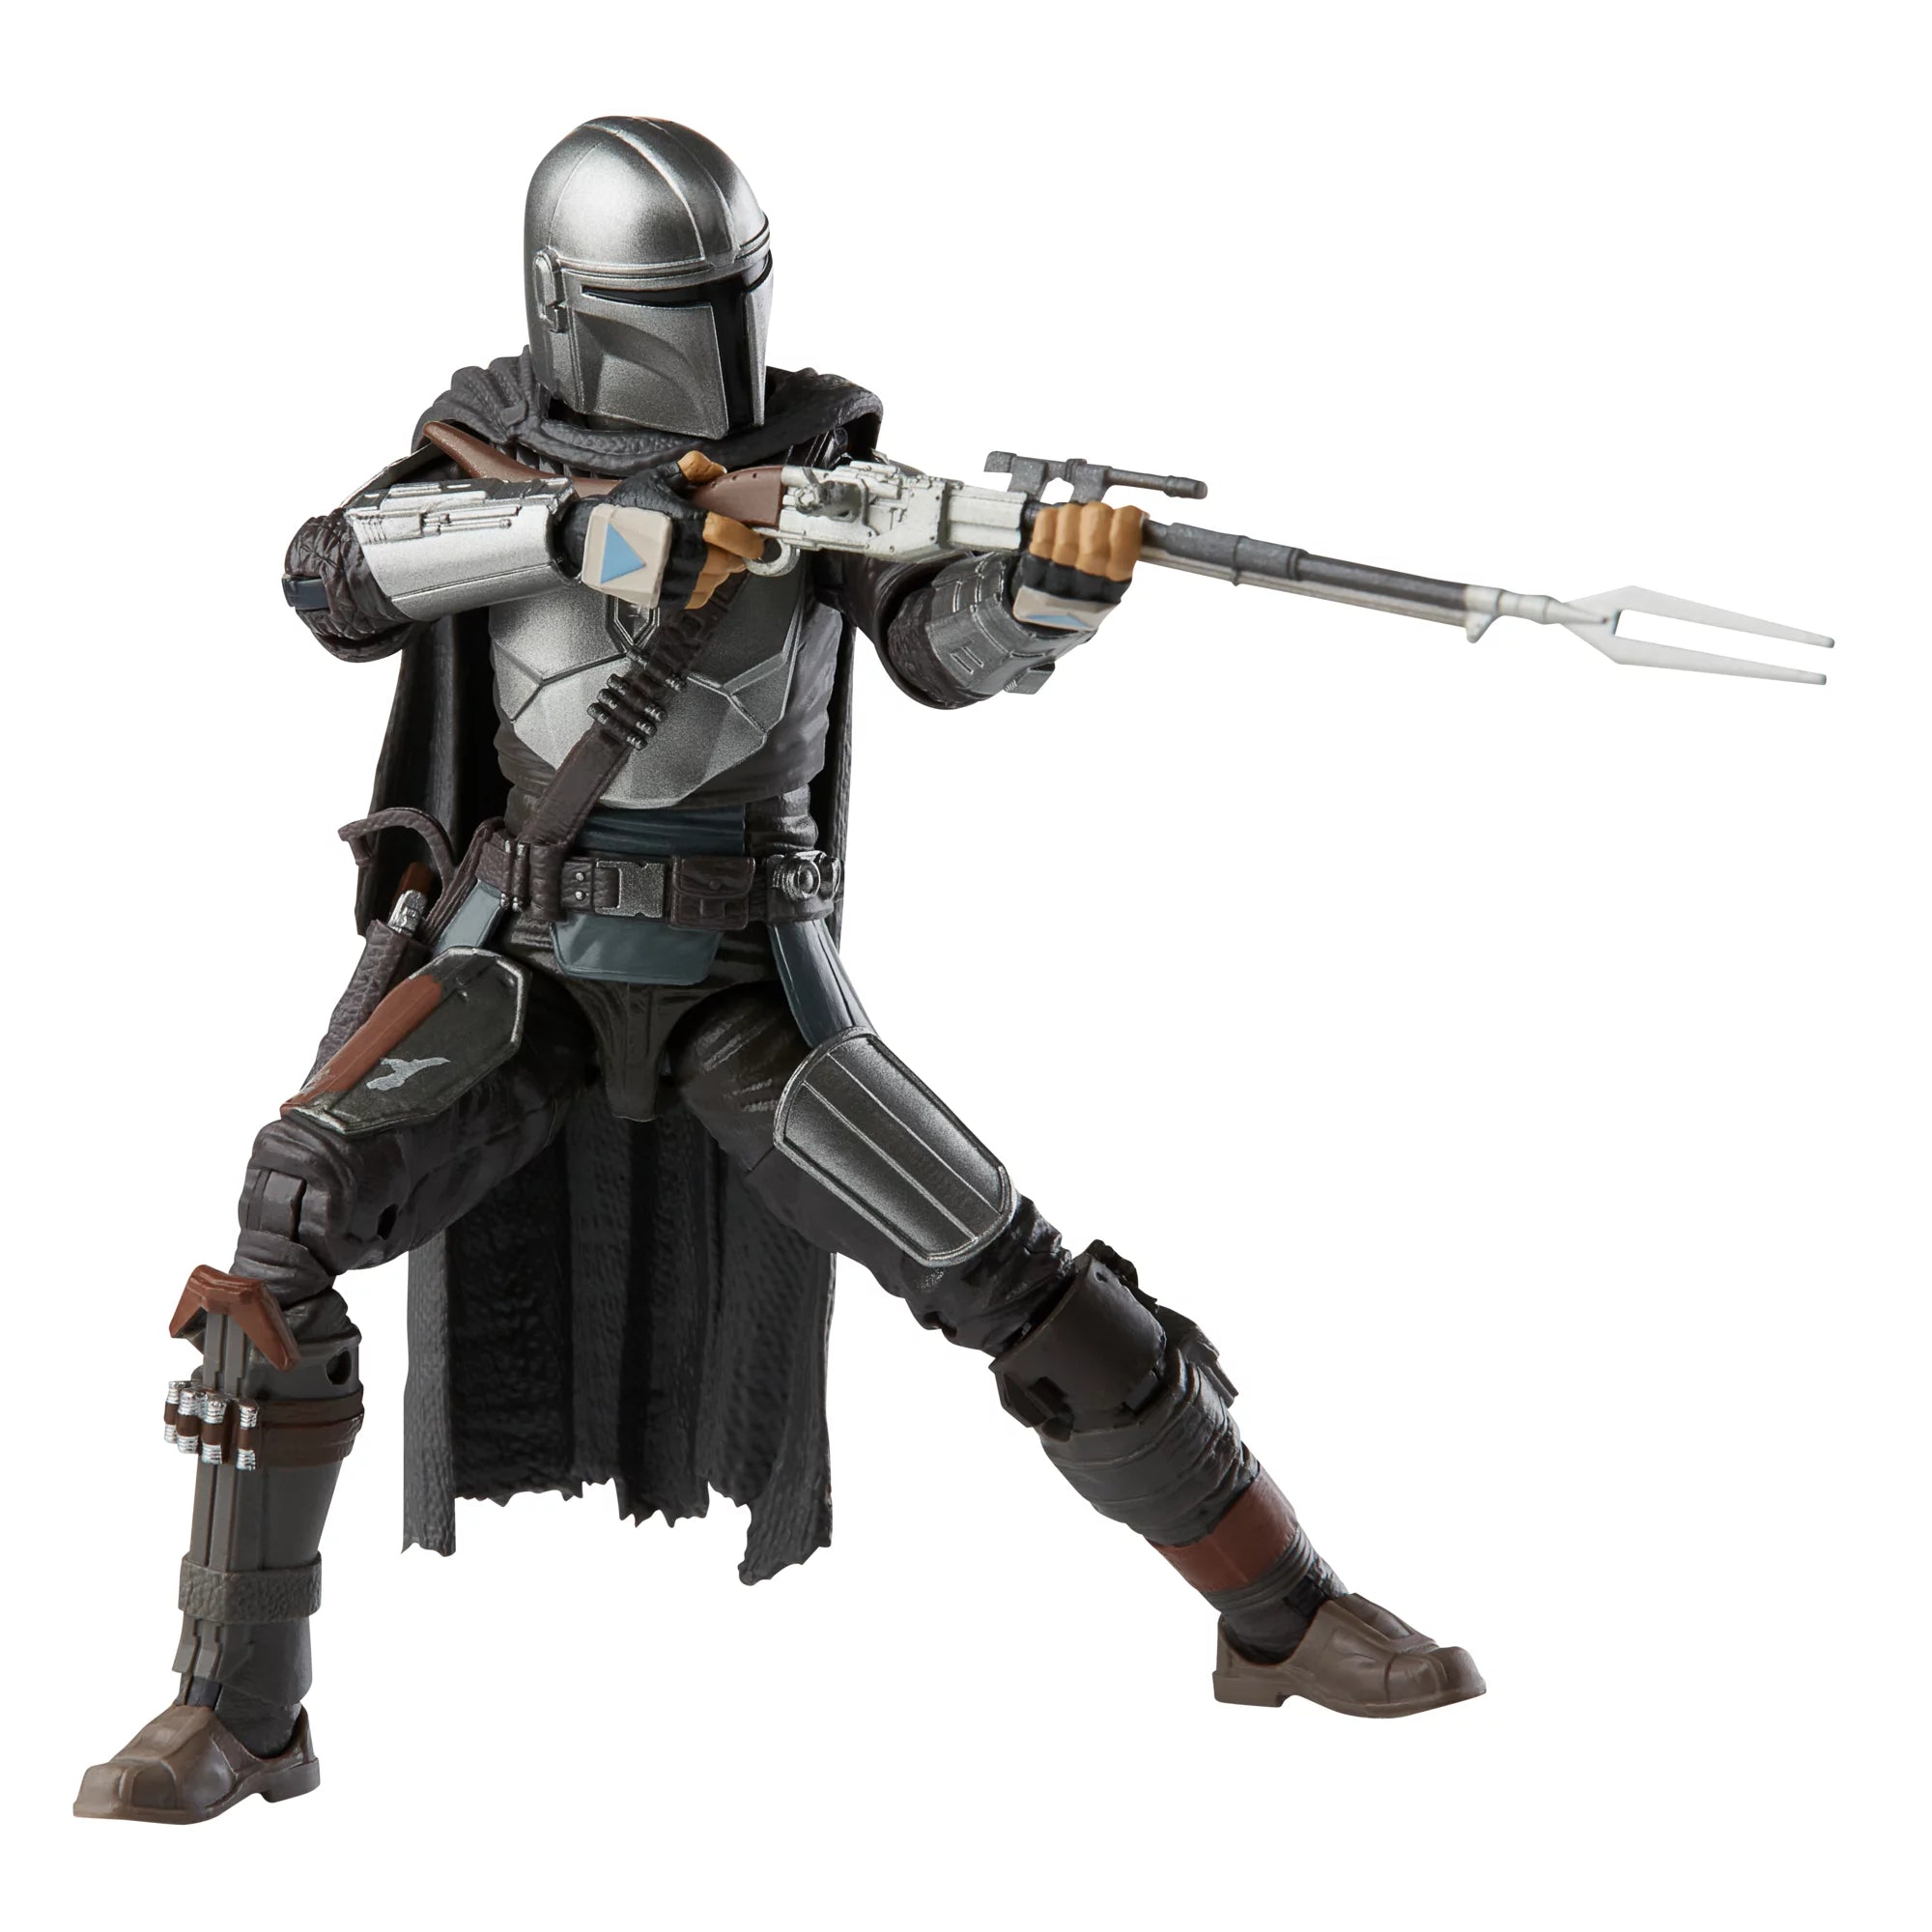 Star Wars The Black Series The Mandalorian Collectible Figure By Hasbro